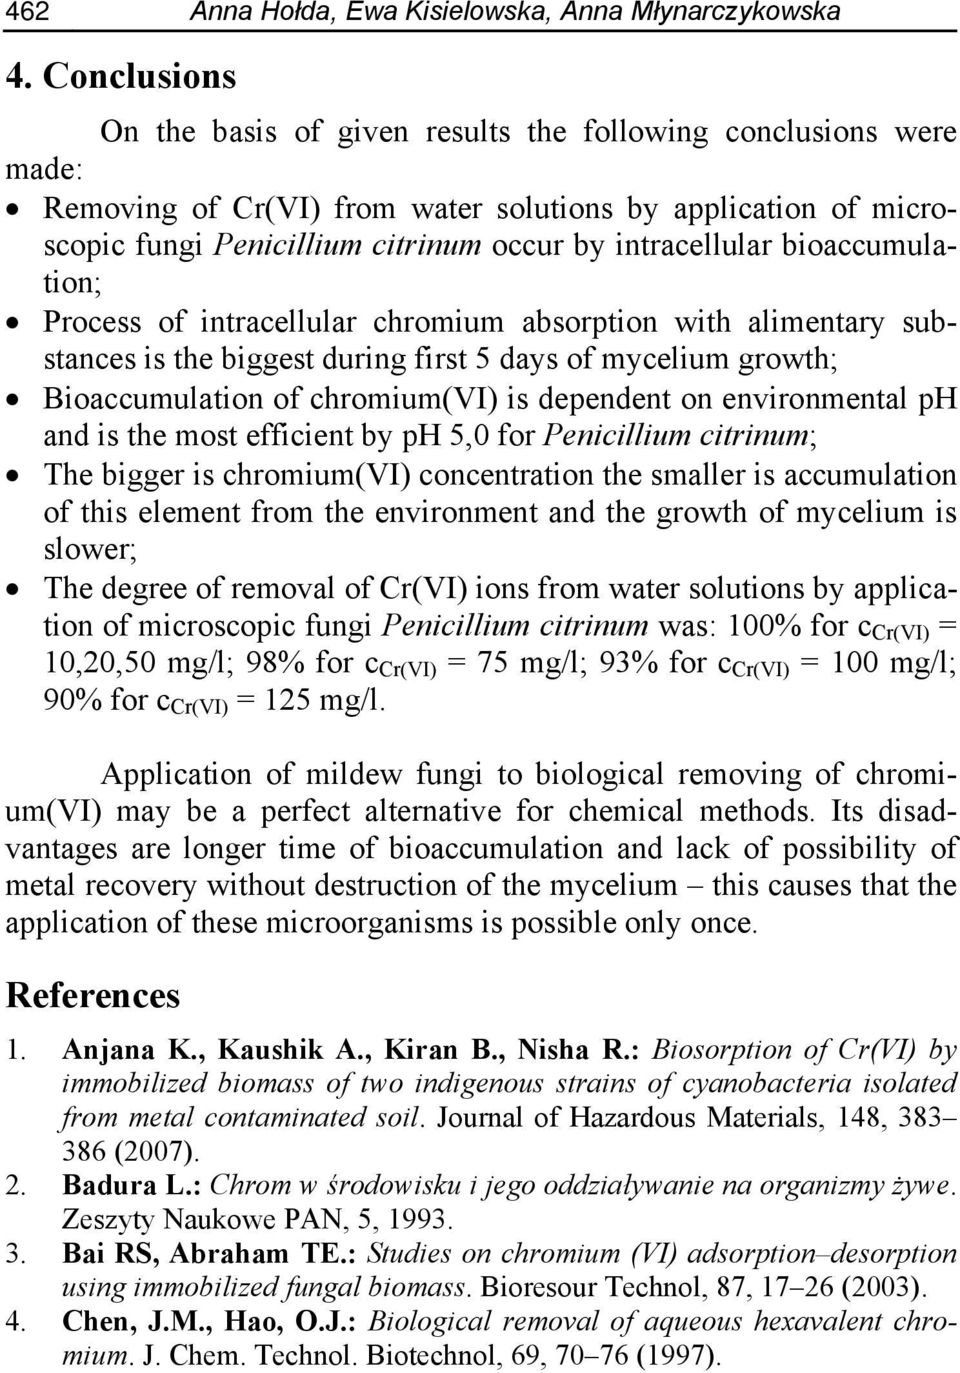 bioaccumulation; Process of intracellular chromium absorption with alimentary substances is the biggest during first 5 days of mycelium growth; Bioaccumulation of chromium(vi) is dependent on